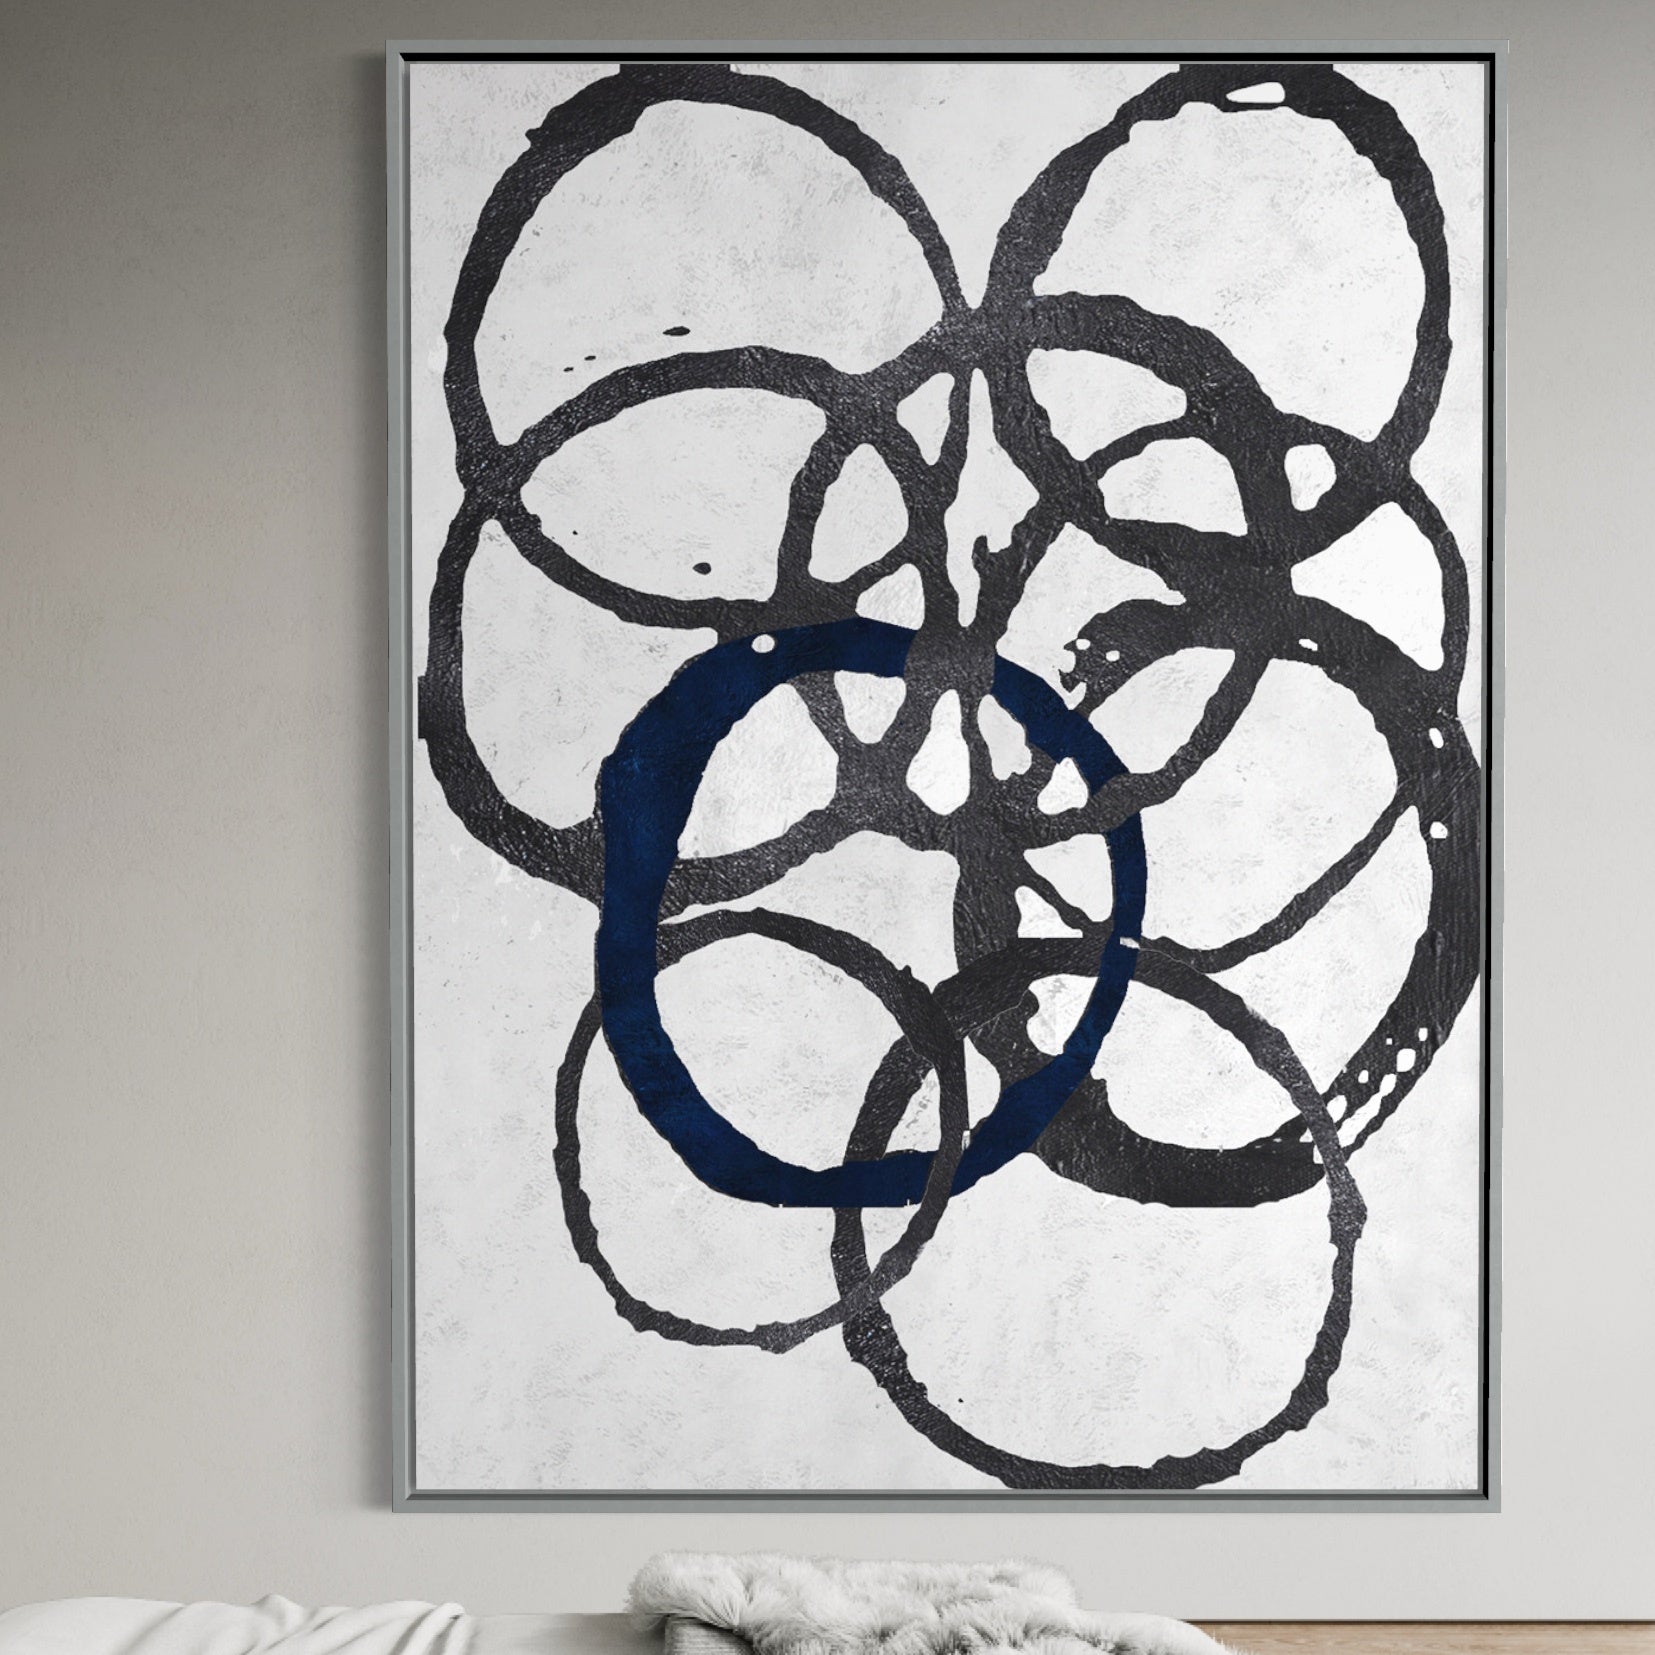 Circles And Charcoal, Black And Golden / 90x120cm